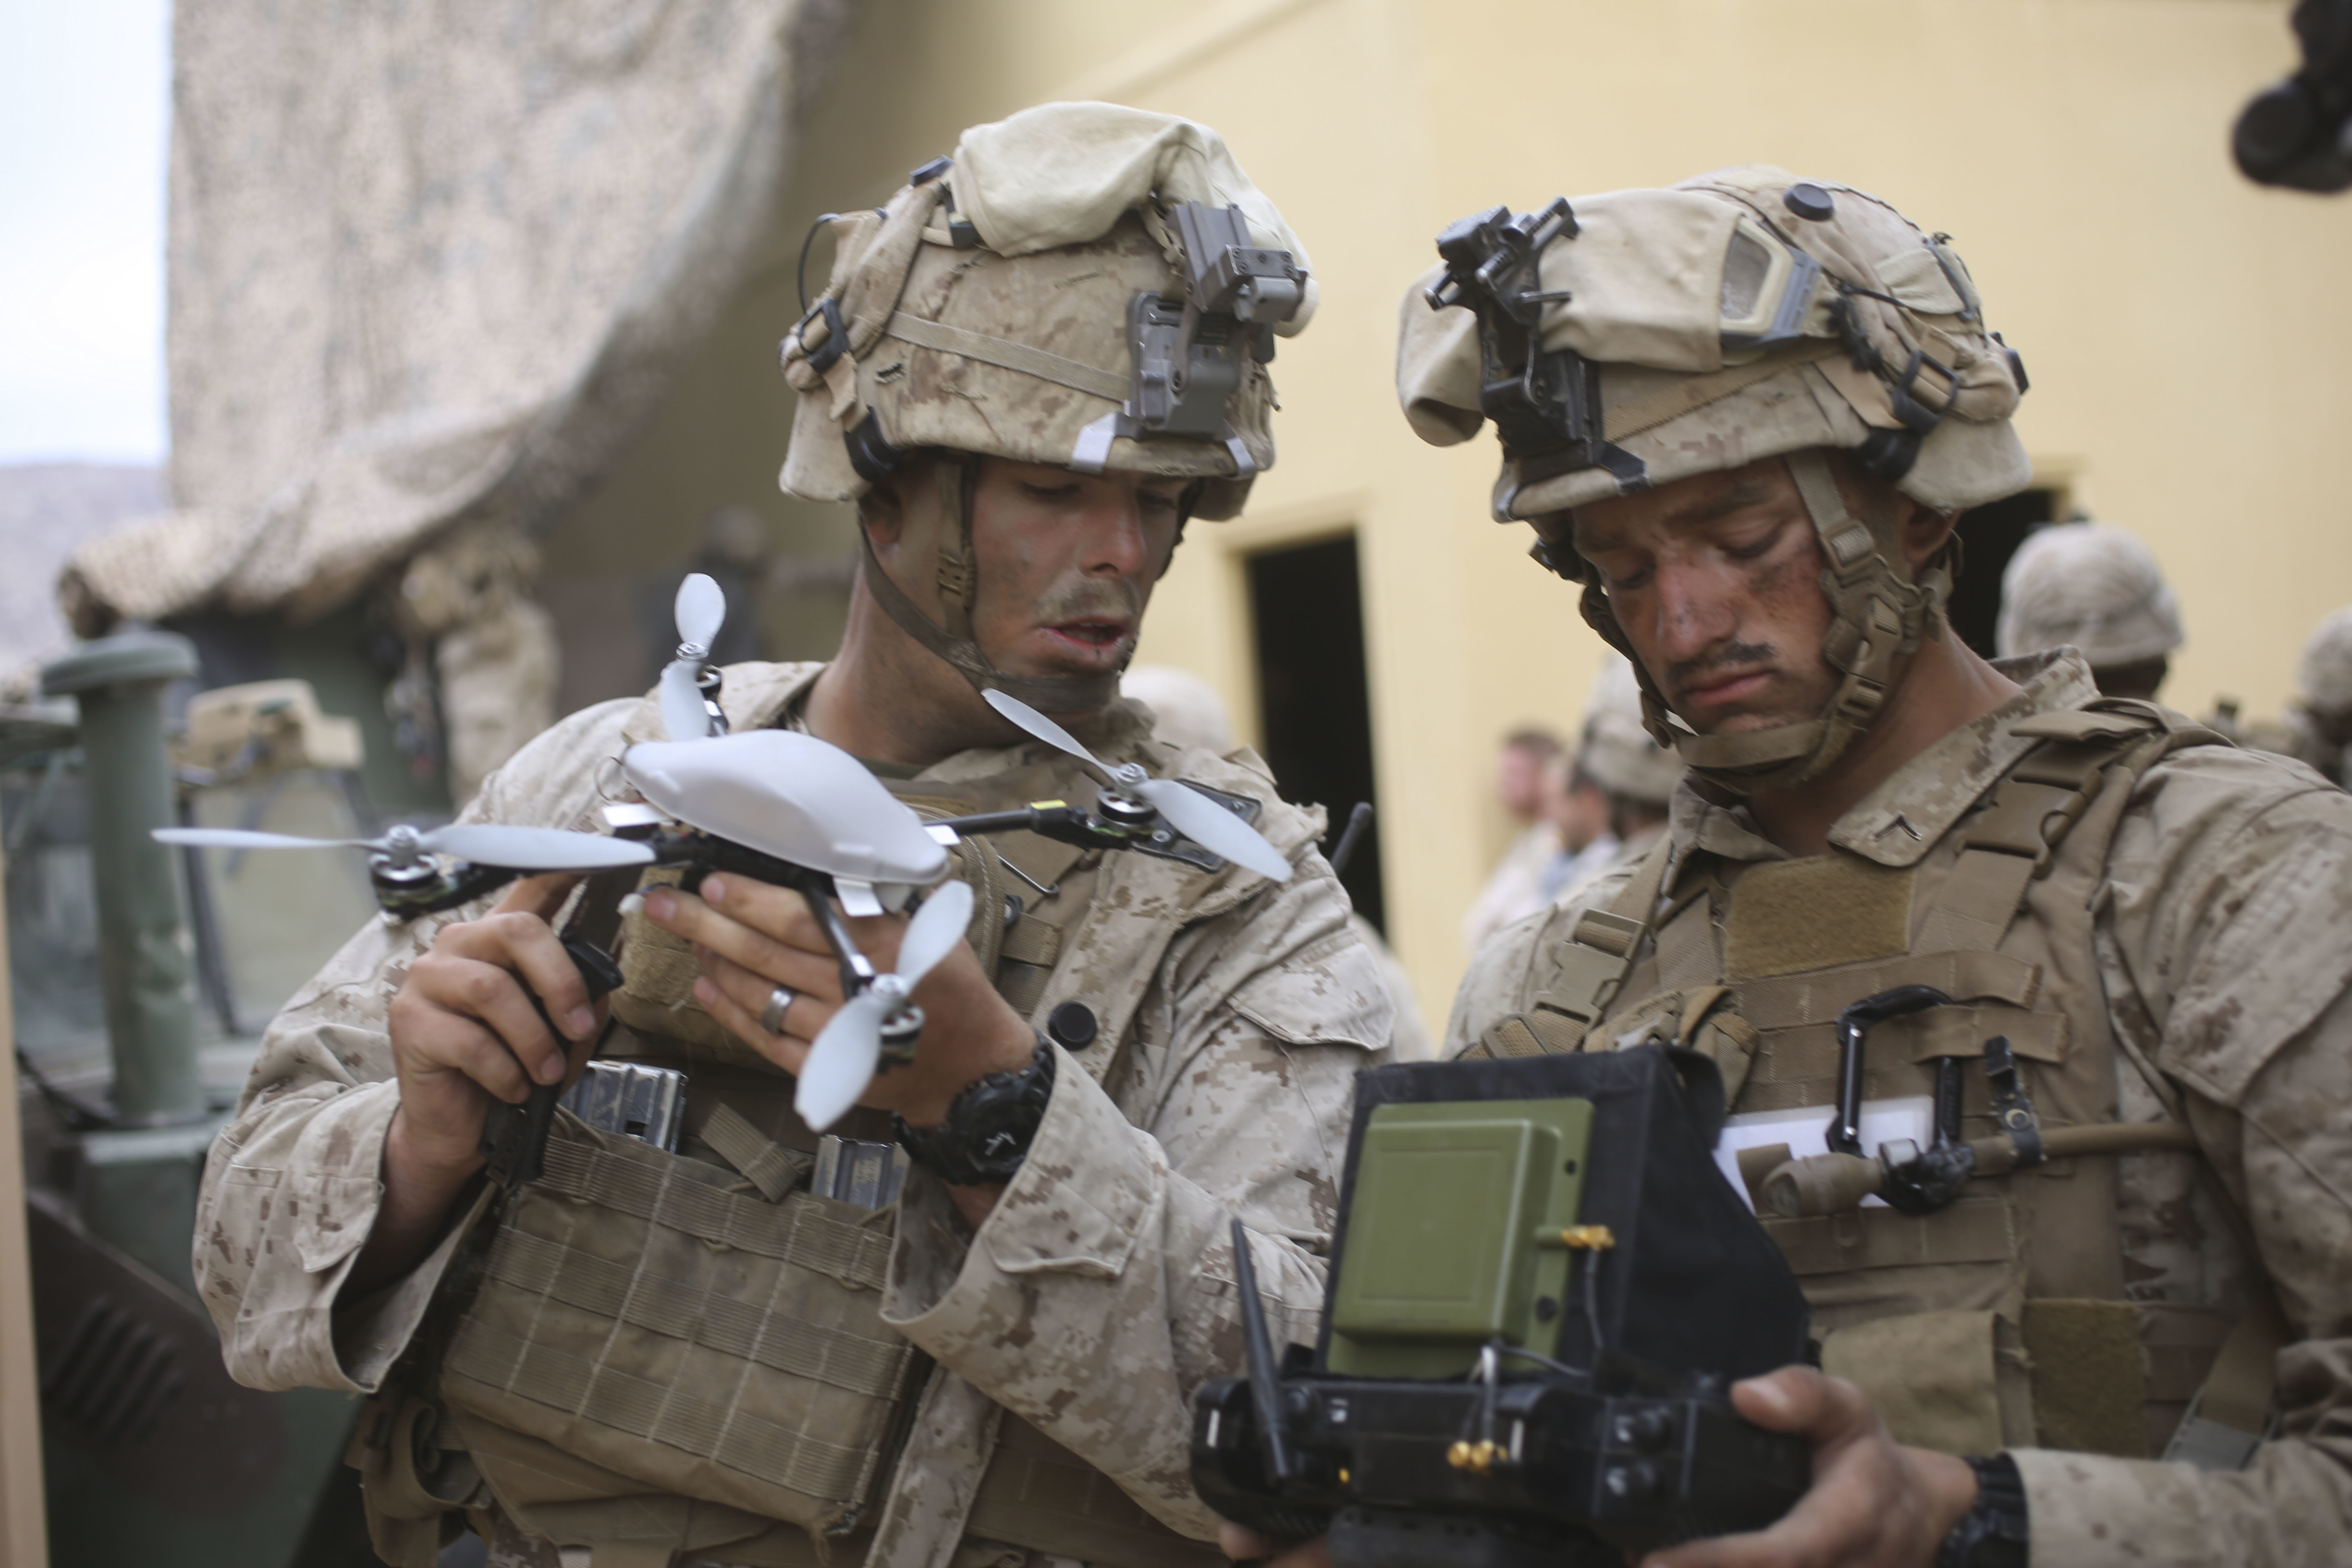 United States Marine Corps Private First Class Julius Lucio (left) and Sergeant Scott Phillips (right), 3rd Battalion, 5th Marine Regiment, India Company, perform last minute checks before taking an Instant-Eye unmanned aerial vehicle on patrol in Marine Corps Air Ground Combat Center 29 Palms, Calif. Oct 23, 2016. USMC Photo